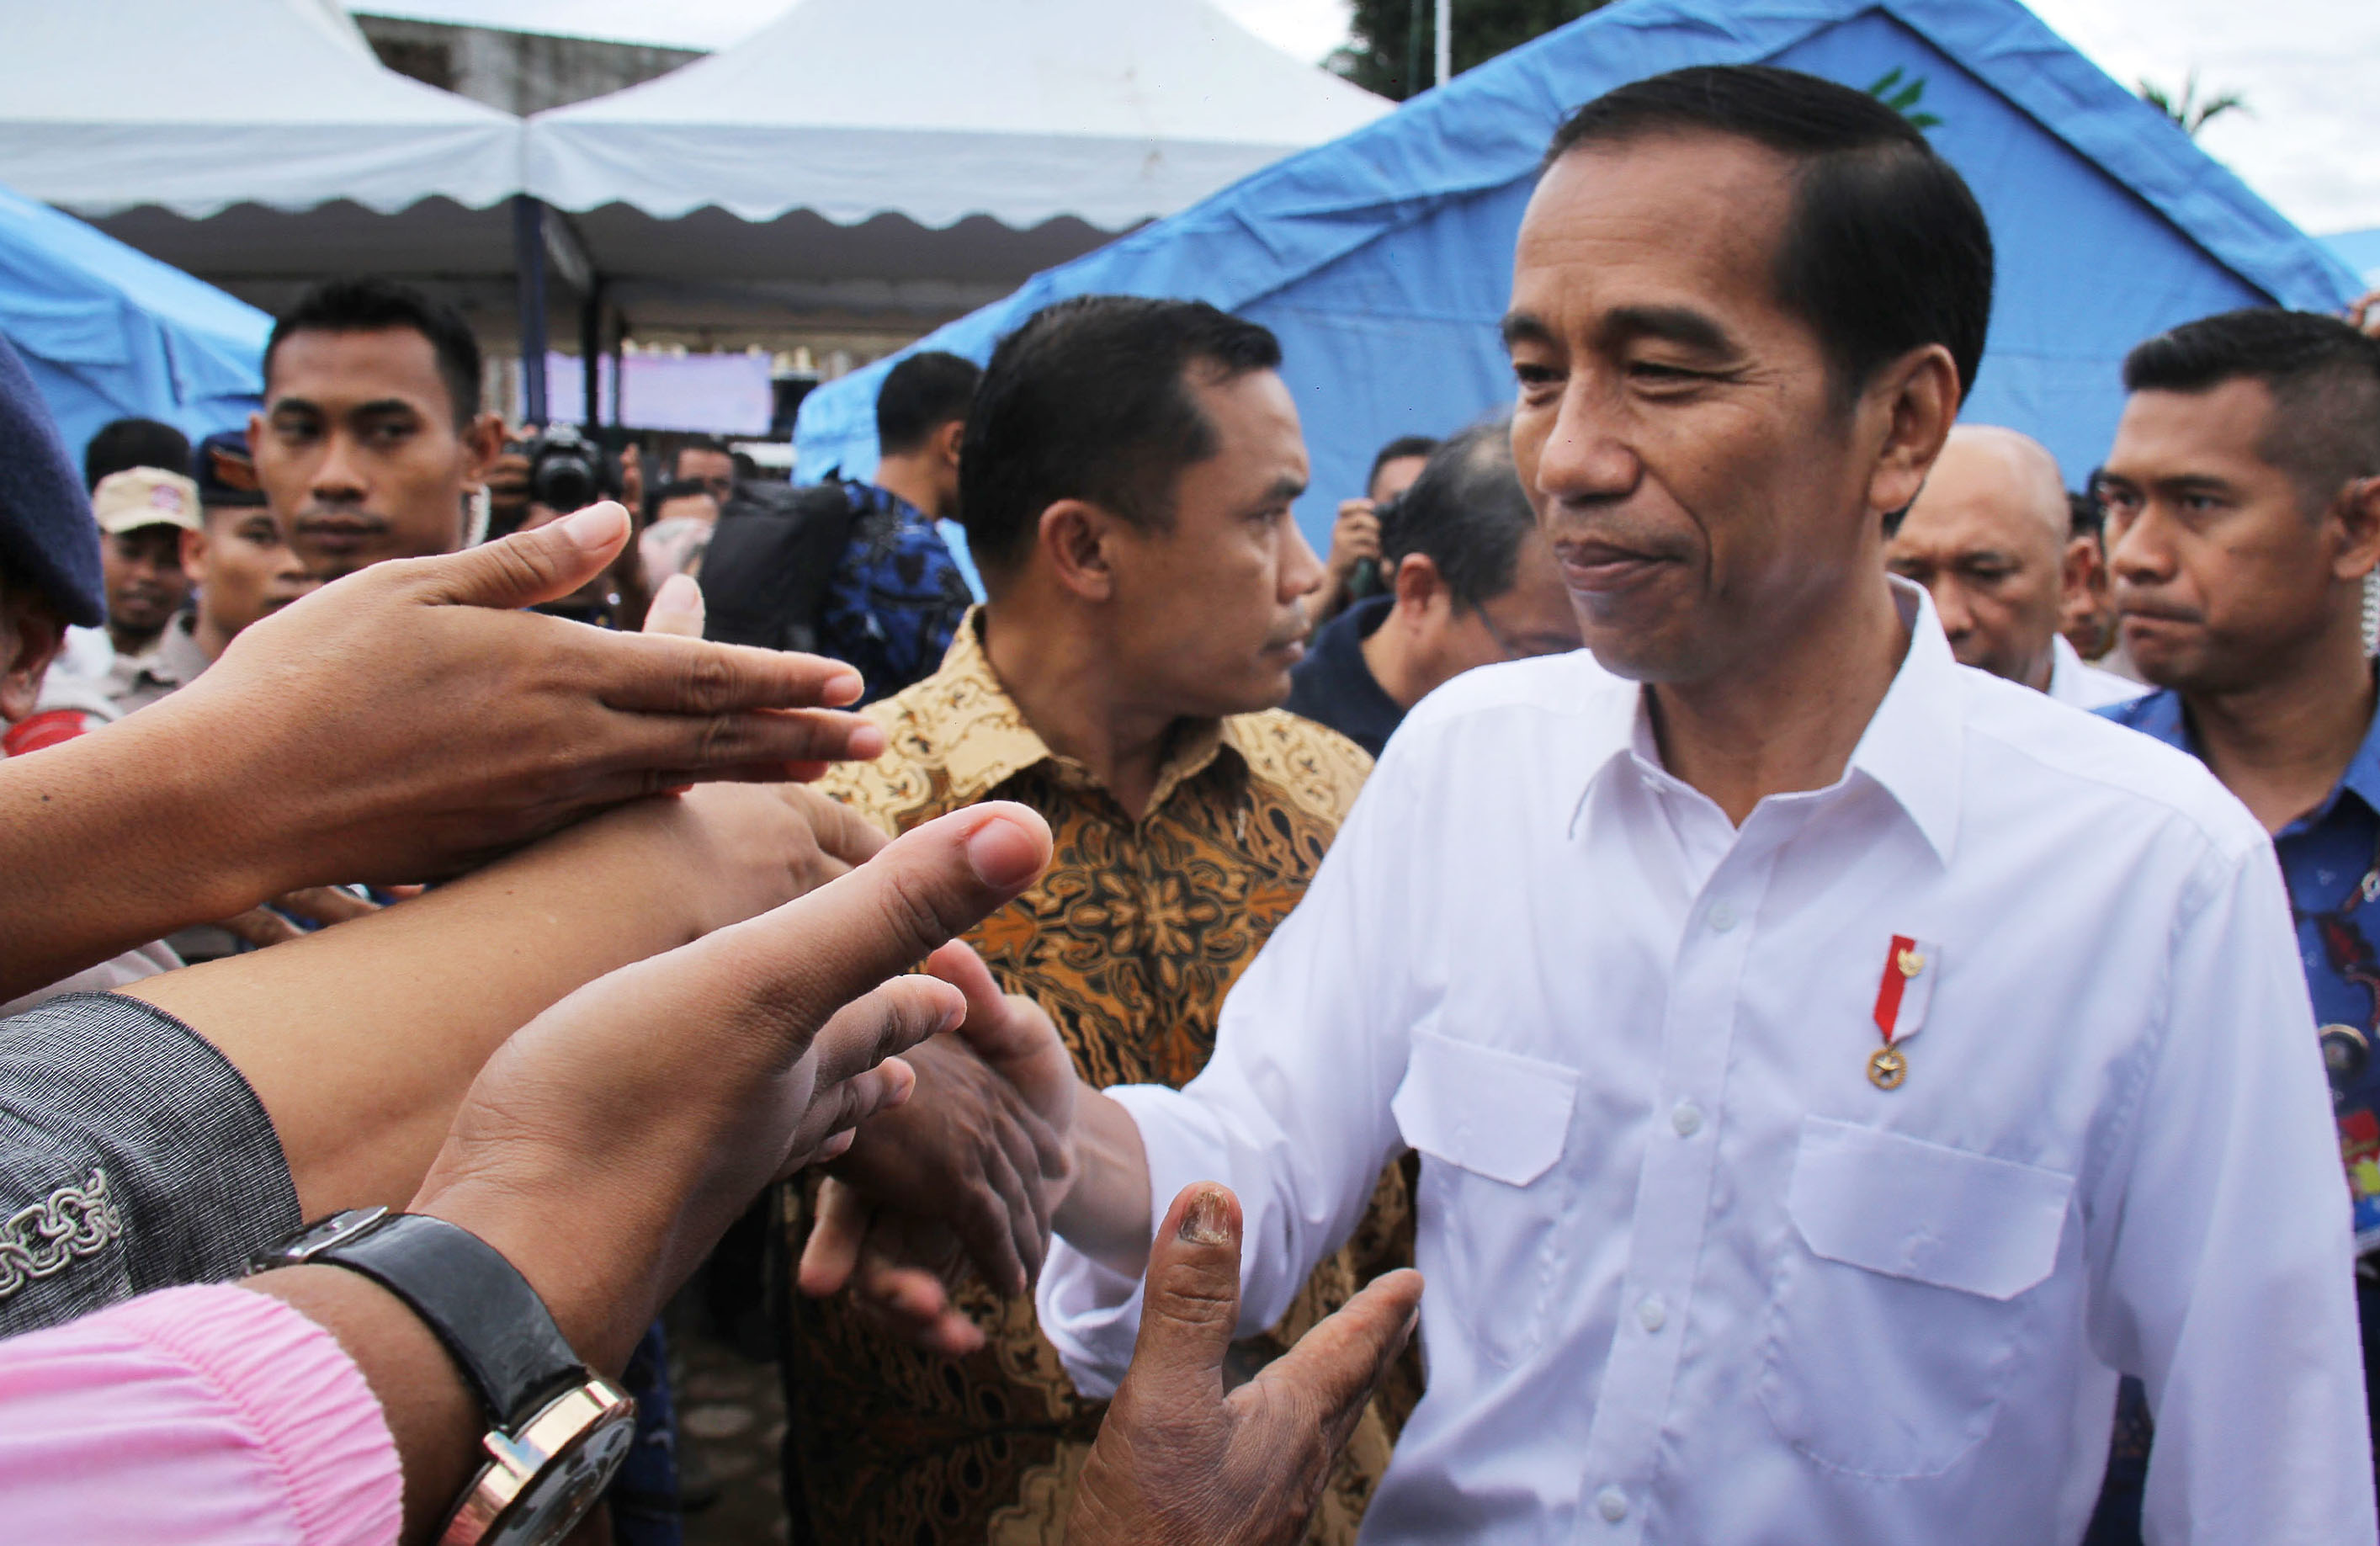 Indonesian President Joko Widodo (R) shakes hands with quake survivors at one of temporary shelter in Pidie Jaya, Aceh province, on December 9, 2016 during his two-day visit.  Widodo pledged to help the people of Aceh rebuild as he toured areas worst-hit by a devastating earthquake that killed more than 100 people and left thousands homeless. / AFP PHOTO / GATHA GINTING